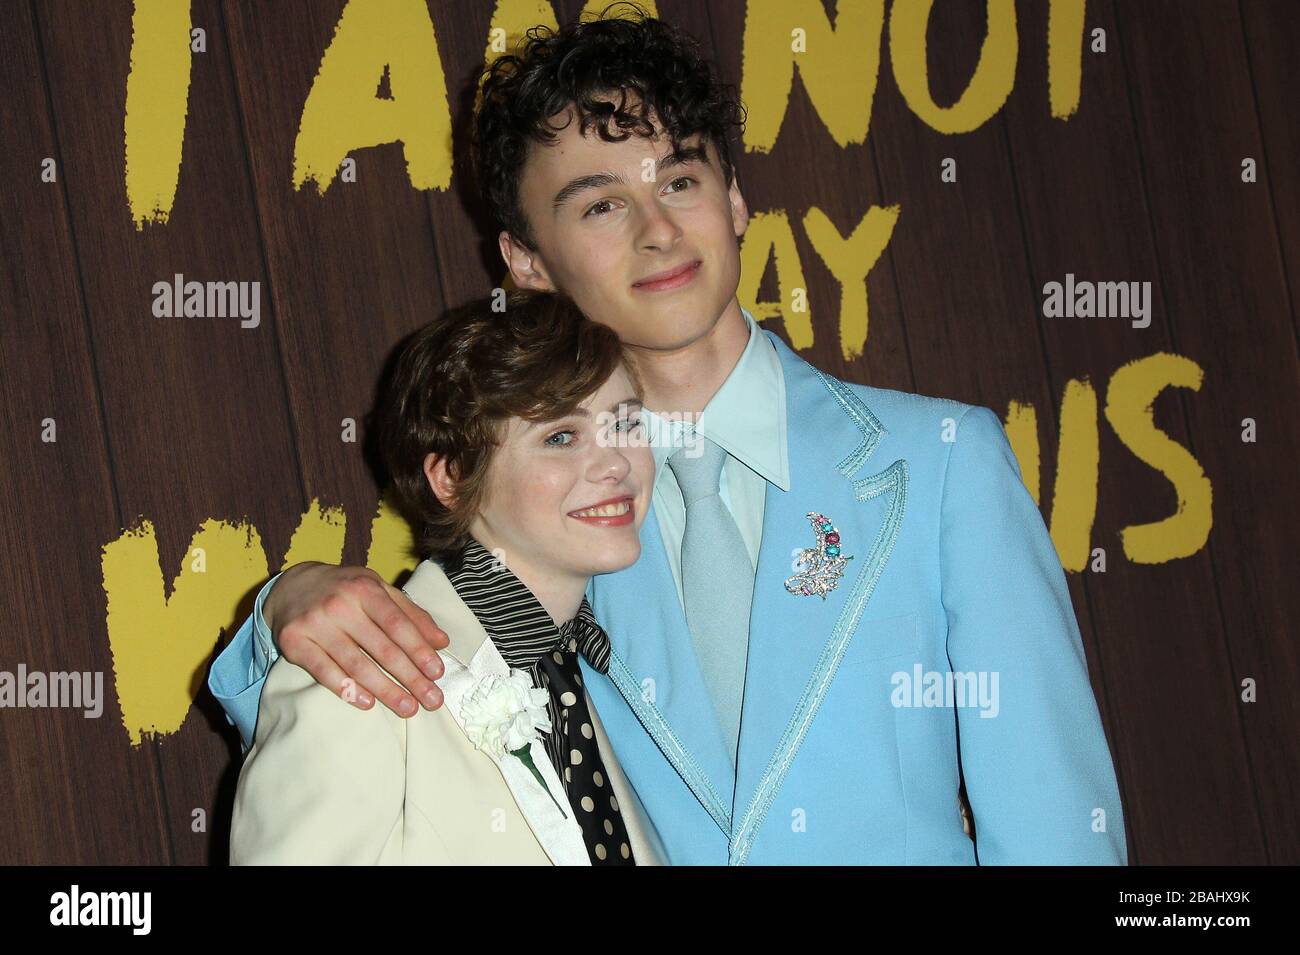 Netflix S I Am Not Okay With This Premiere Held At The London West Hollywood In Los Angeles California Featuring Sophia Lillis Wyatt Oleff Where Los Angeles California United States When 26 Feb